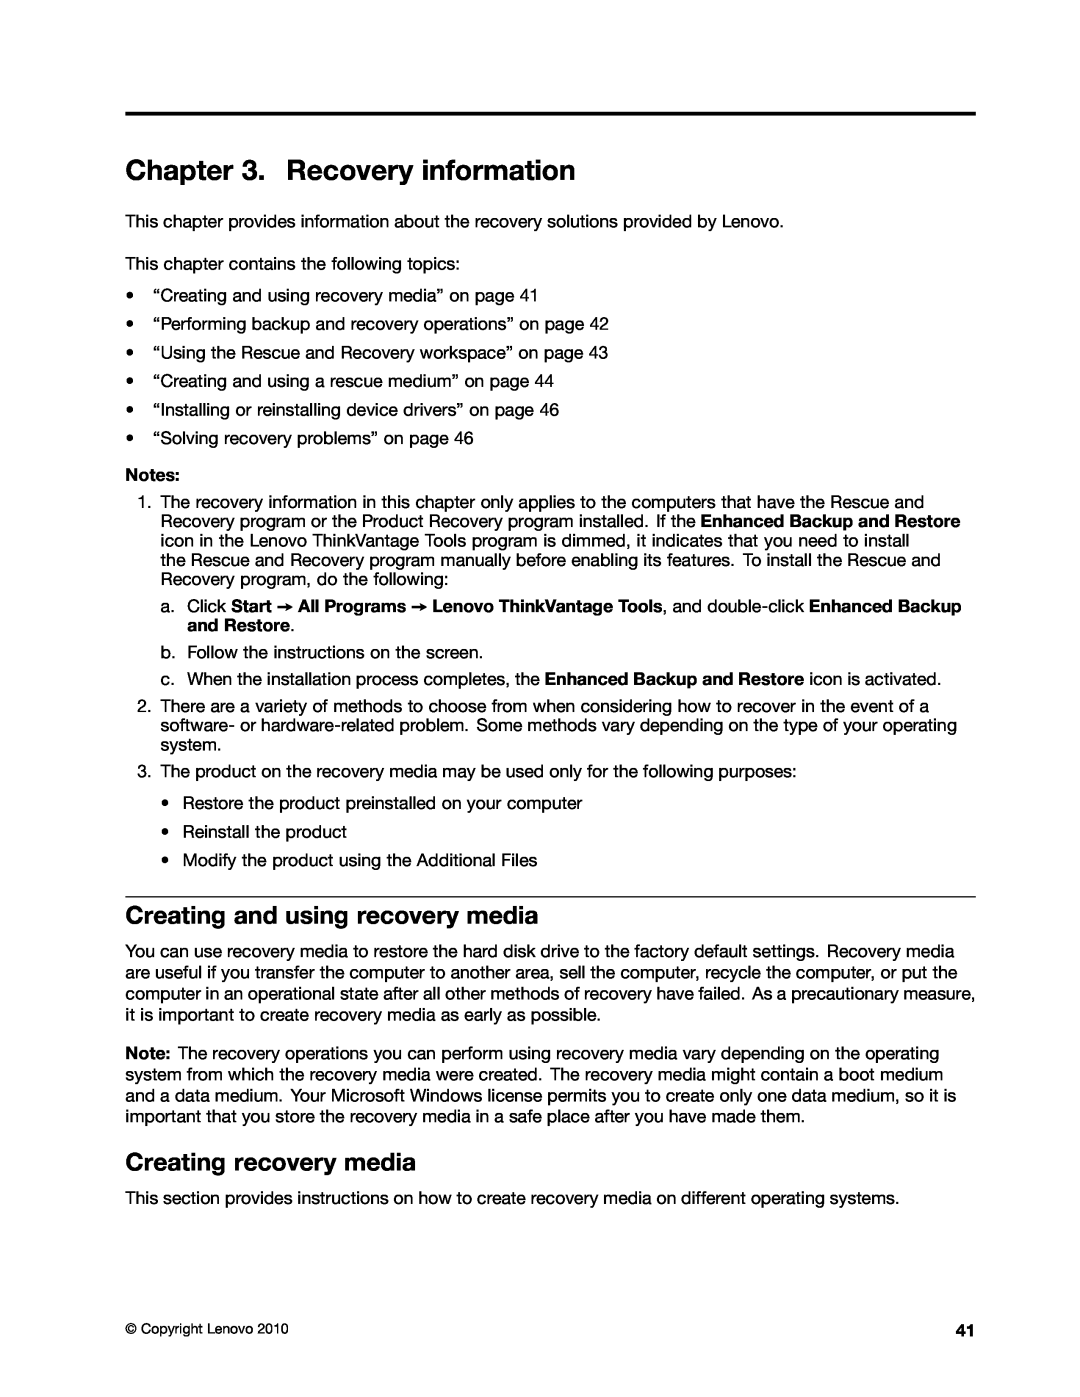 Lenovo 5061, 5063, 5065, 5059, 5053, 5044 Recovery information, Creating and using recovery media, Creating recovery media 